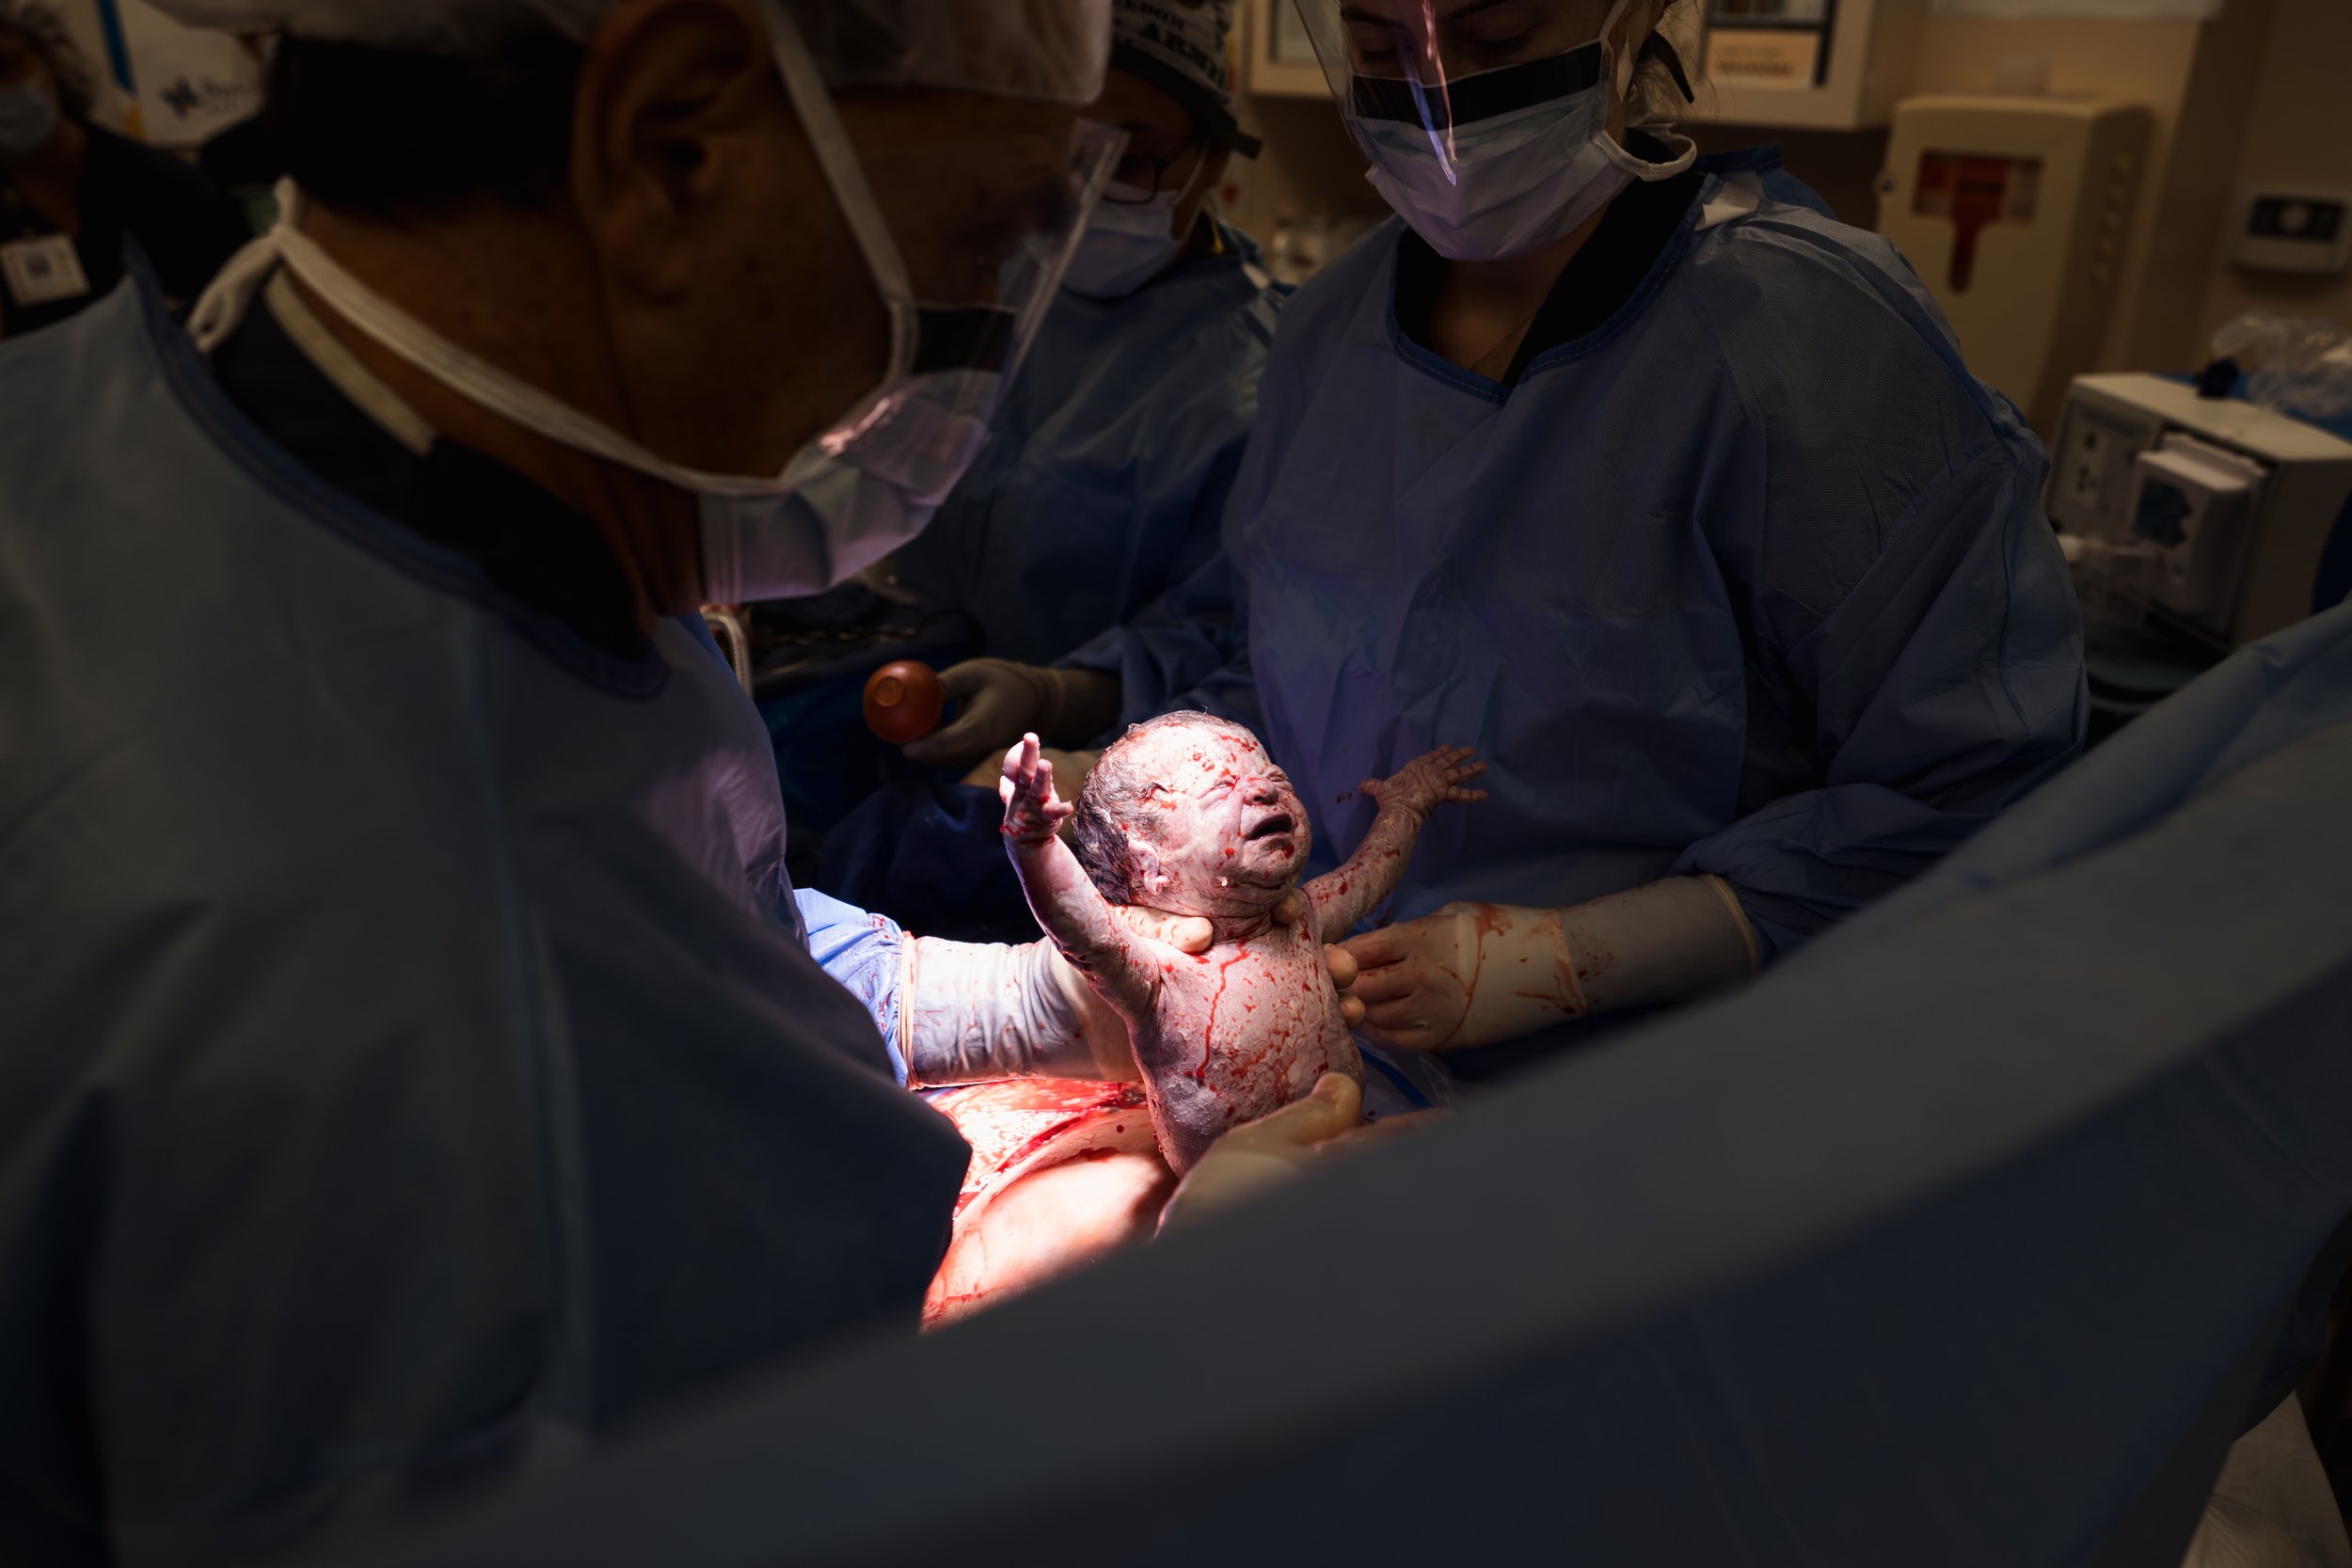 baby reaches up being born via c-section in Dallas hospital operating room